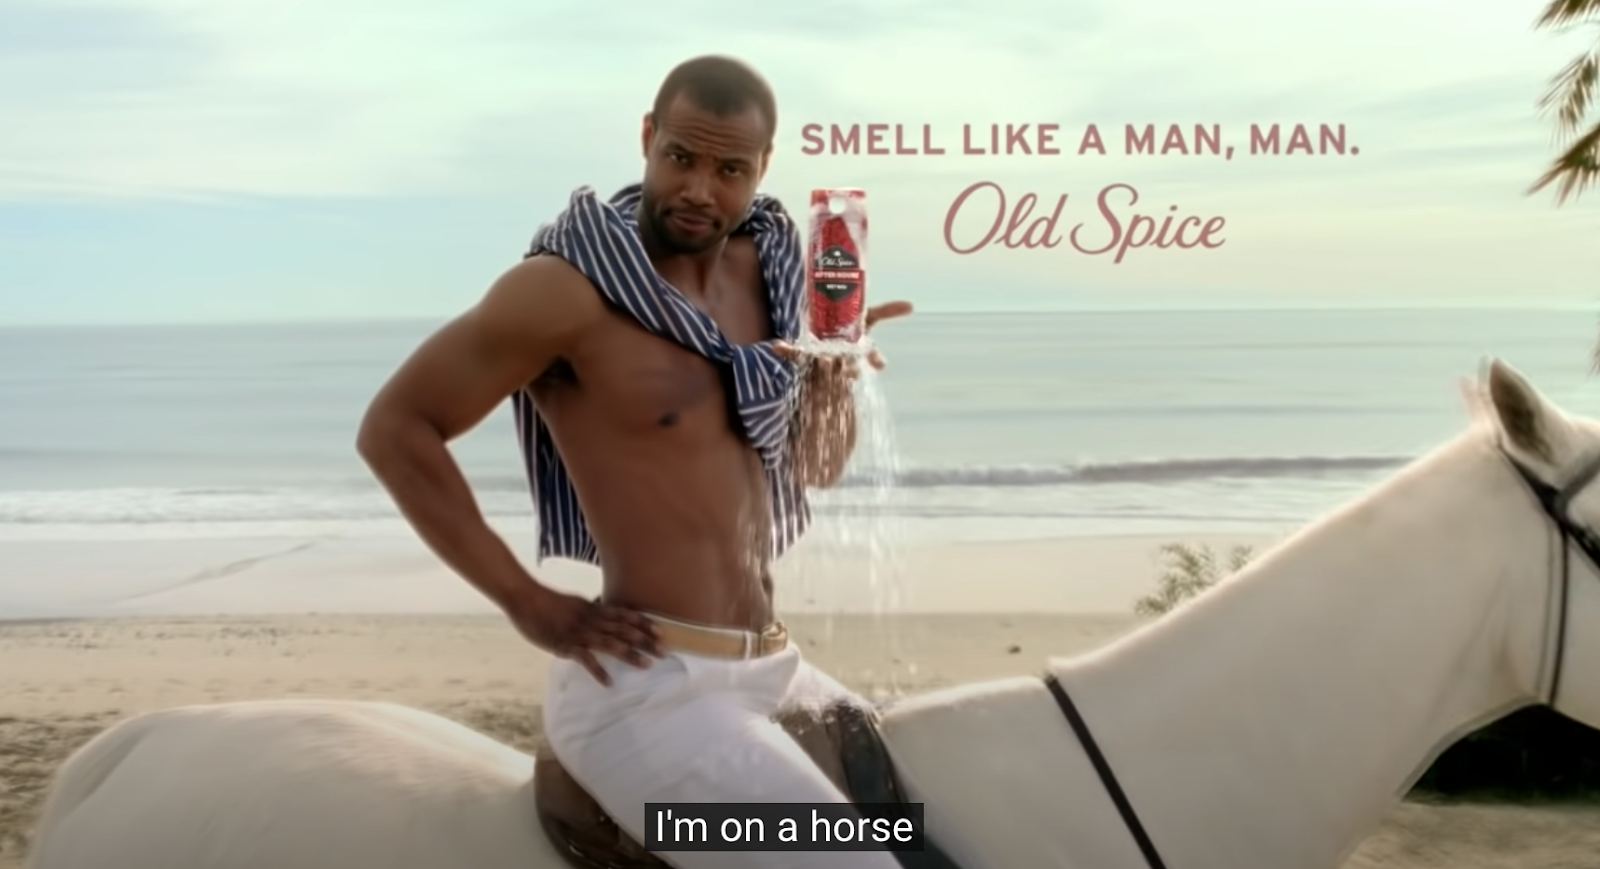 The Old Spice guy on a horse